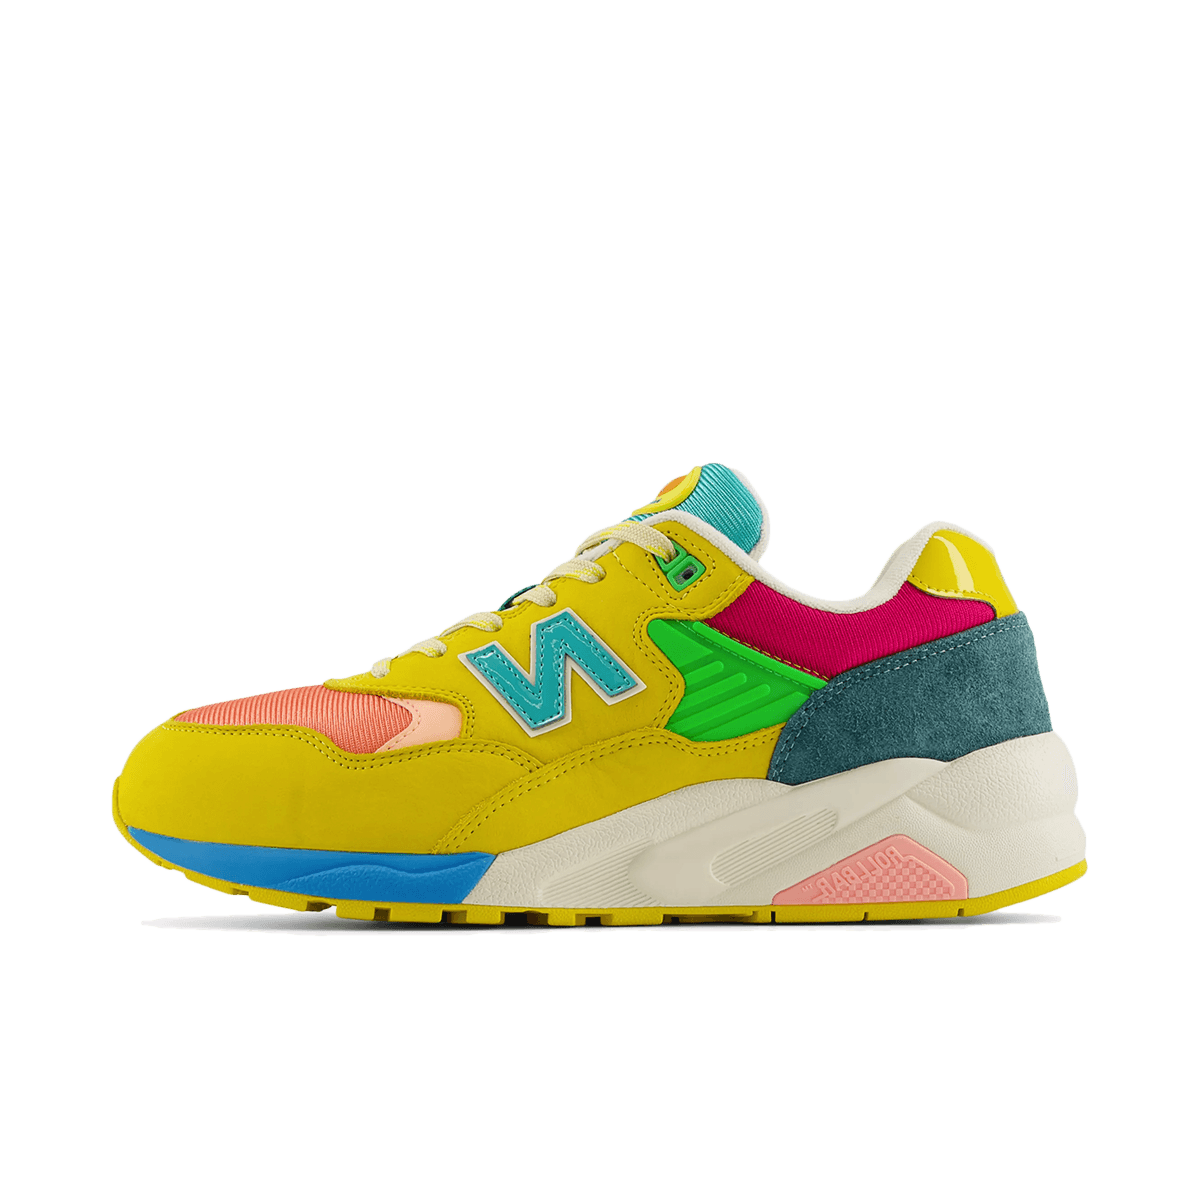 New Balance 580 'Yellow & Teal' - Patent Pack MT580SFB